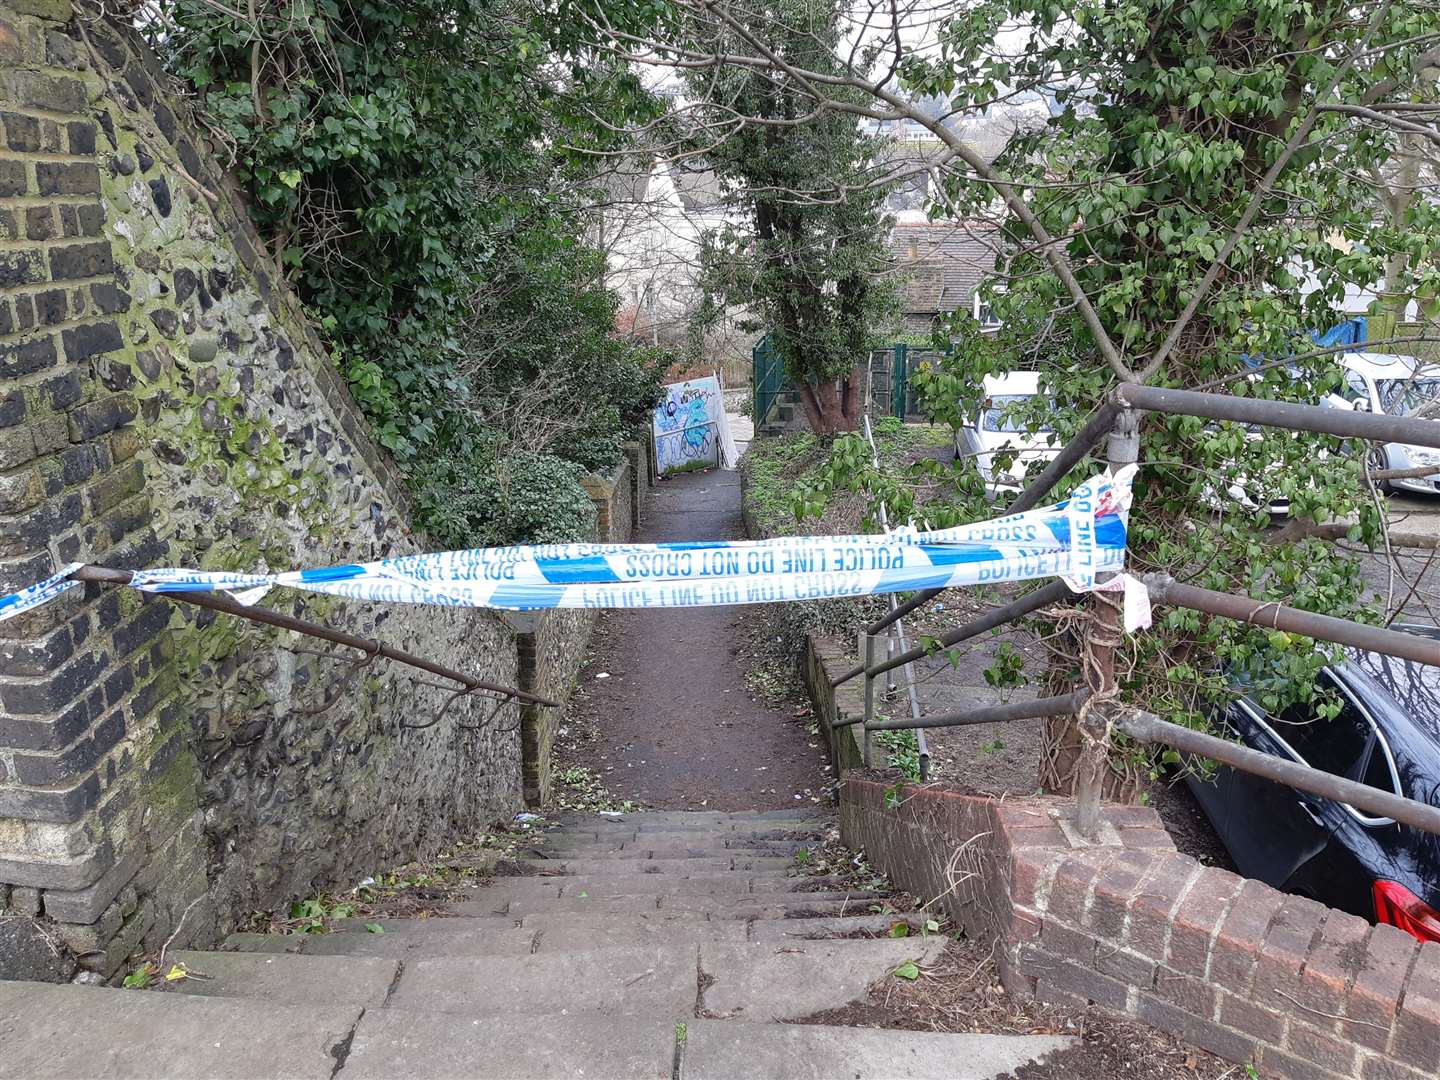 The alleyway from Folkestone Road to North Military Road is closed along with all other access points (45267447)